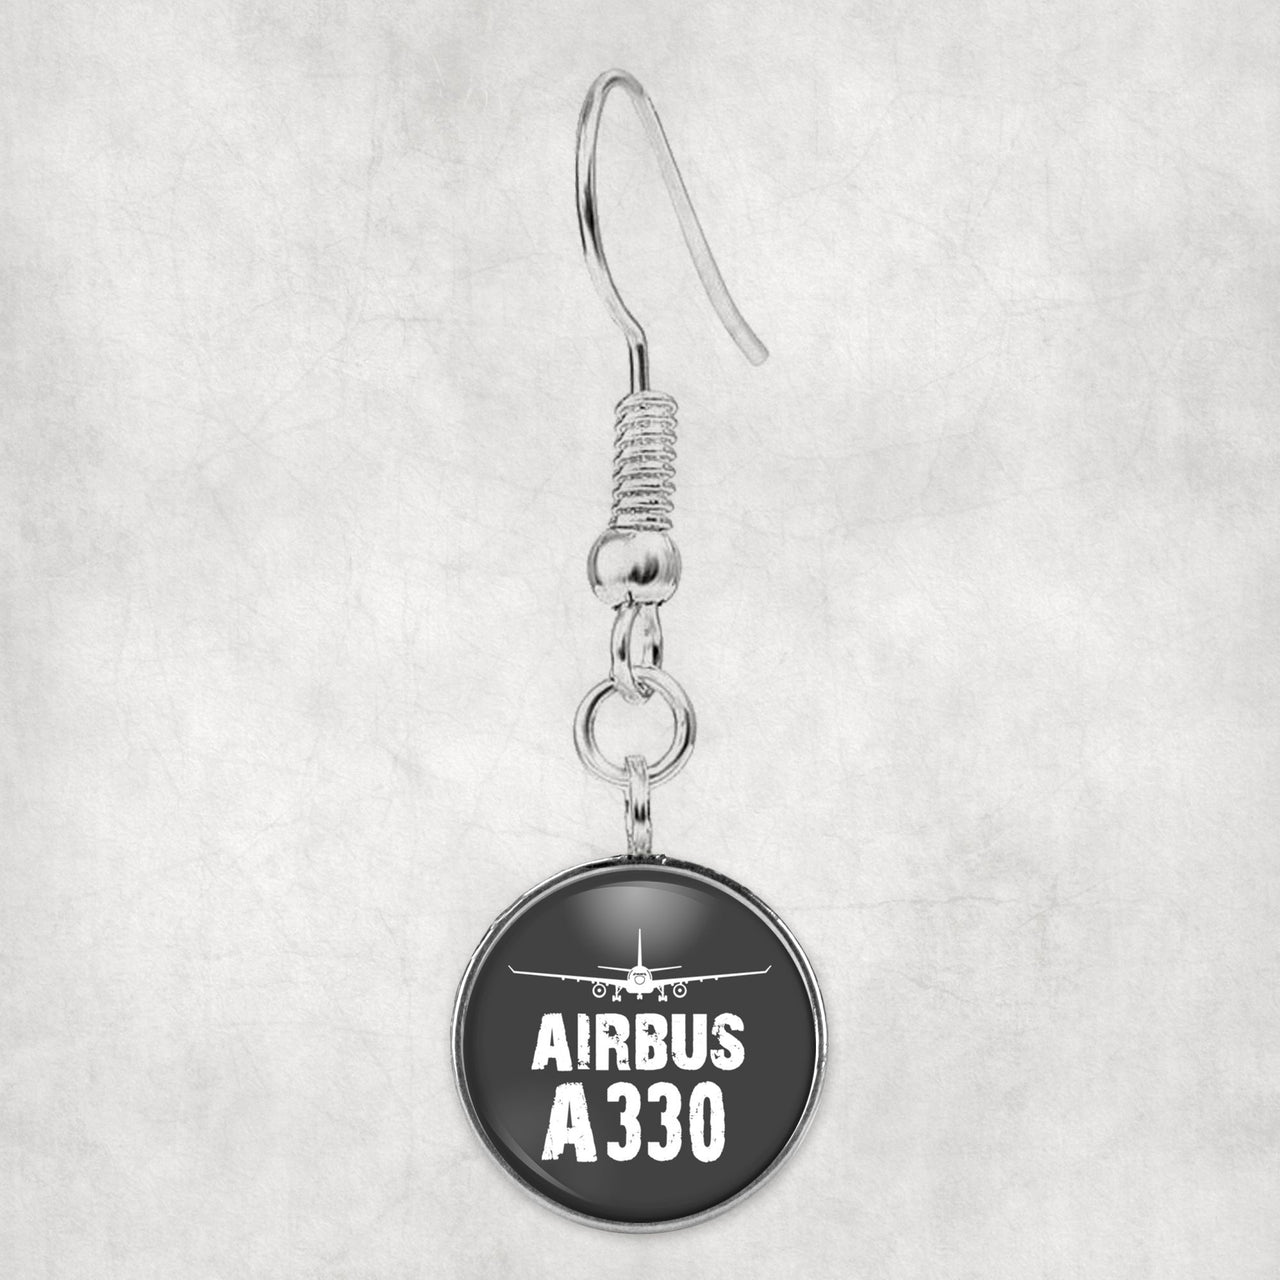 Airbus A330 & Plane Designed Earrings